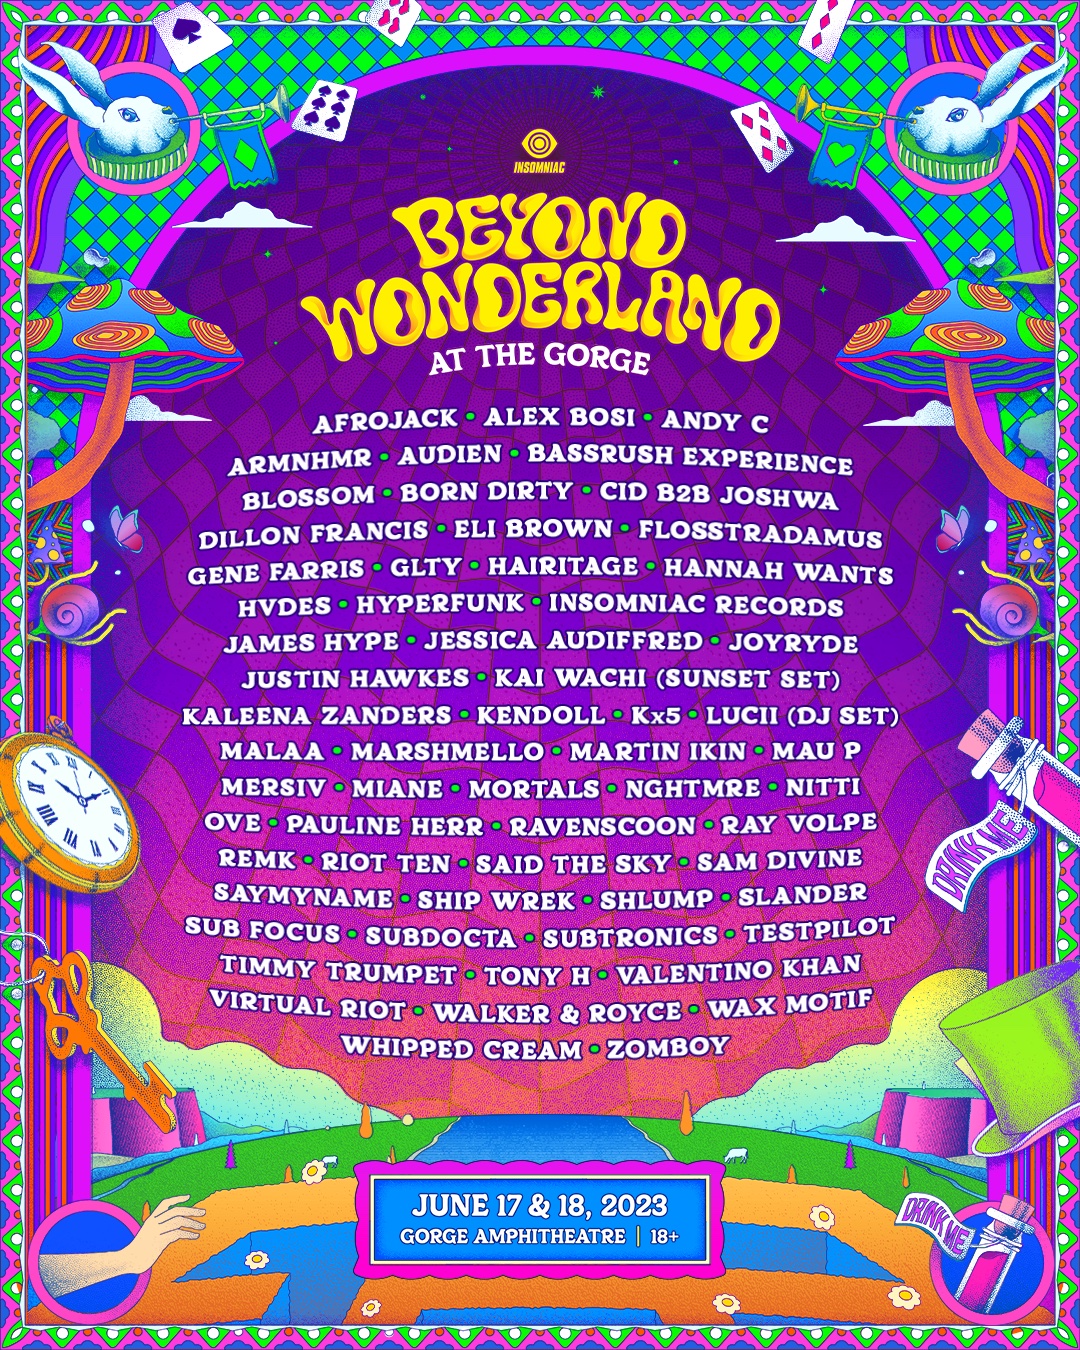 Festival: Beyond Wonderland at The Gorge – Seattle, Wash. tickets and ...